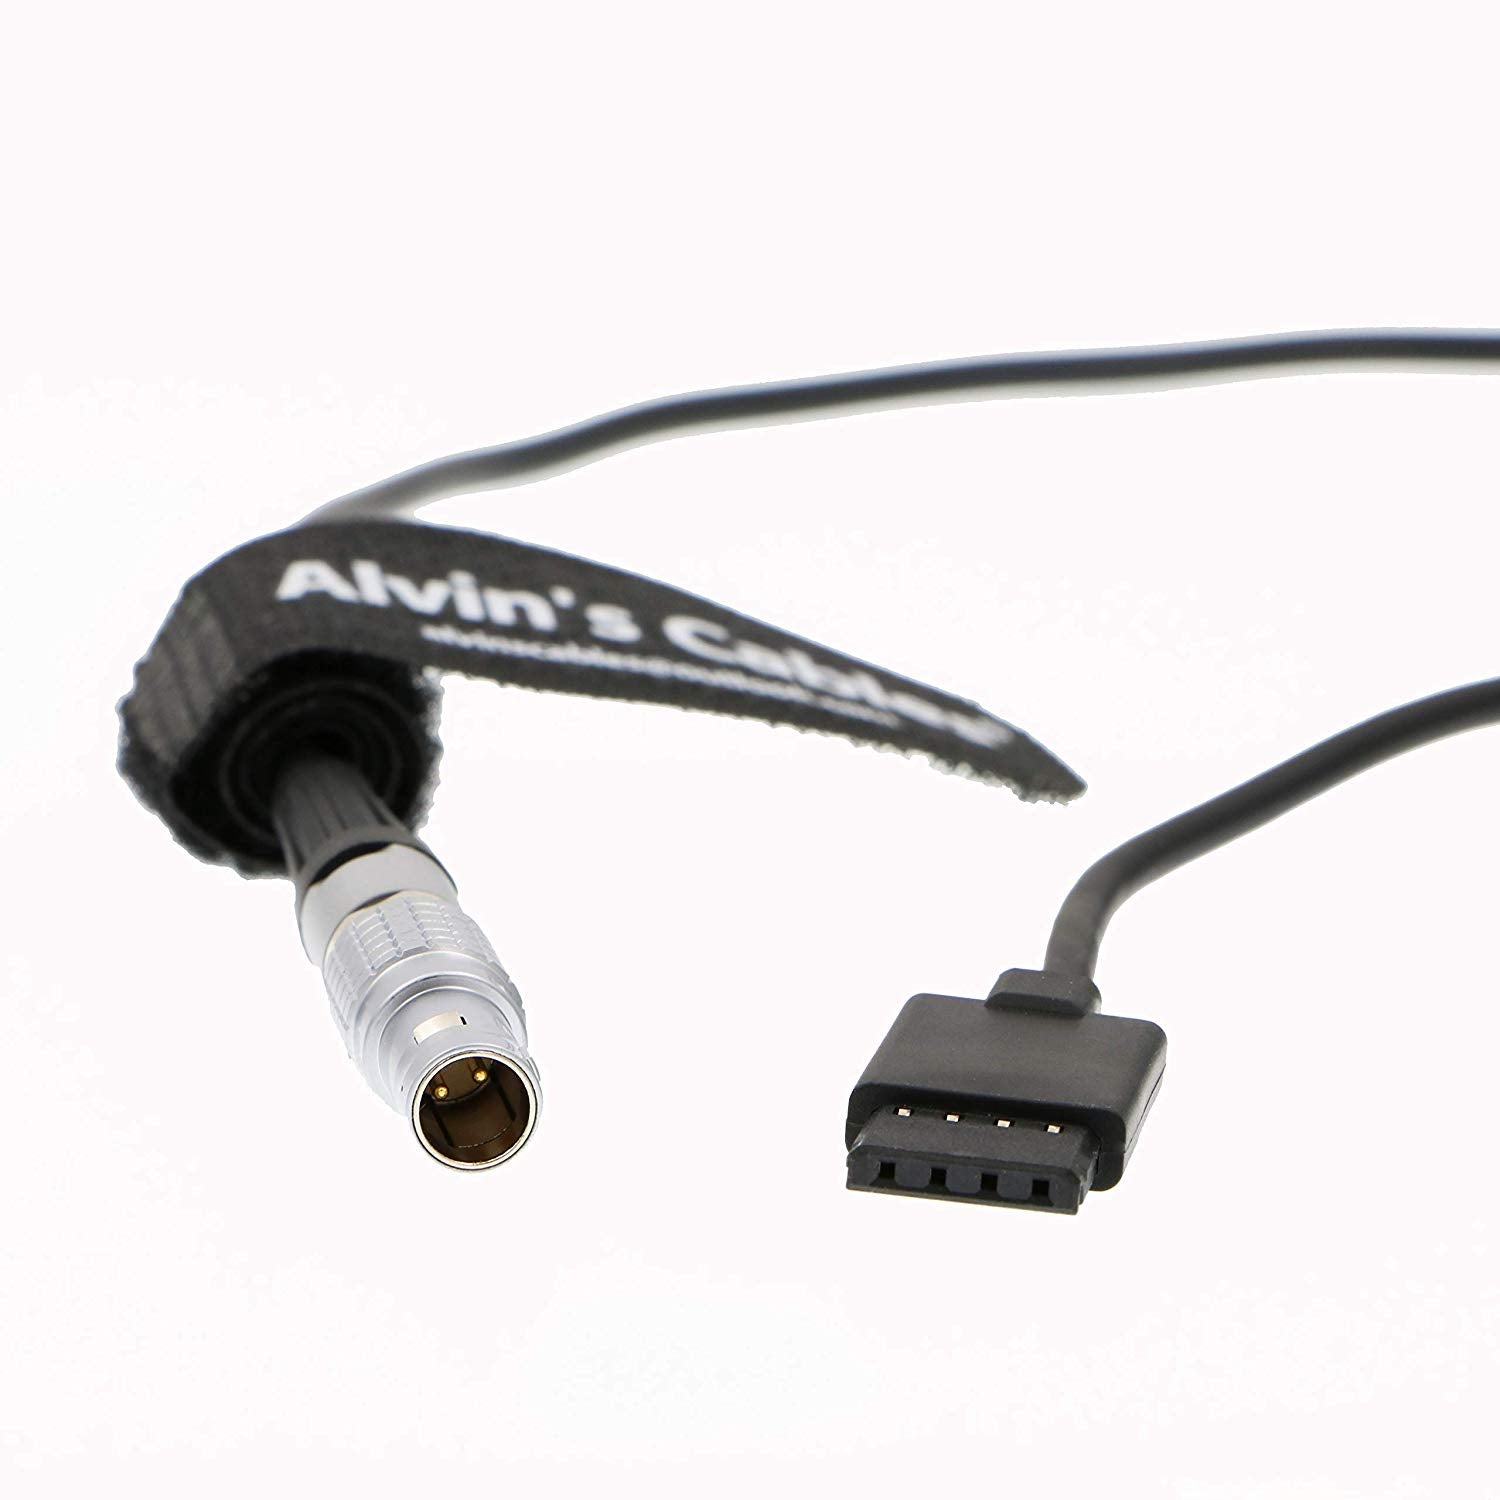 Alvin's Cables Ronin S 4 Pin to 2 Pin Power Cable for Cinegears Follow Focus